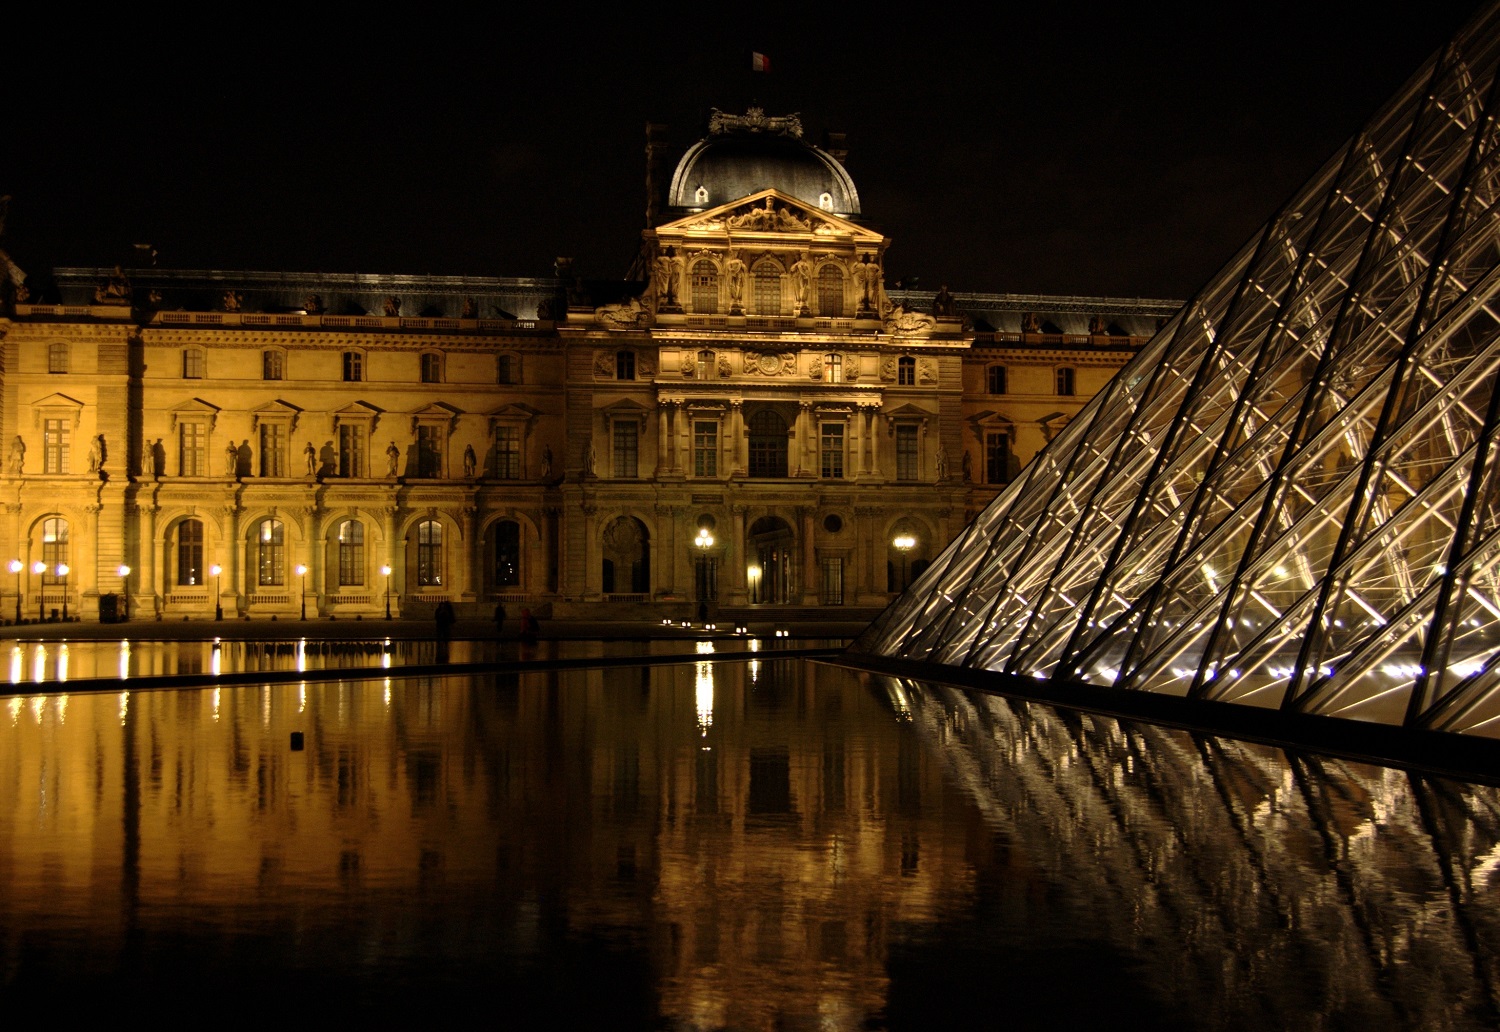 A night image of the illuminated Louvre from the reflecting pool near the front.